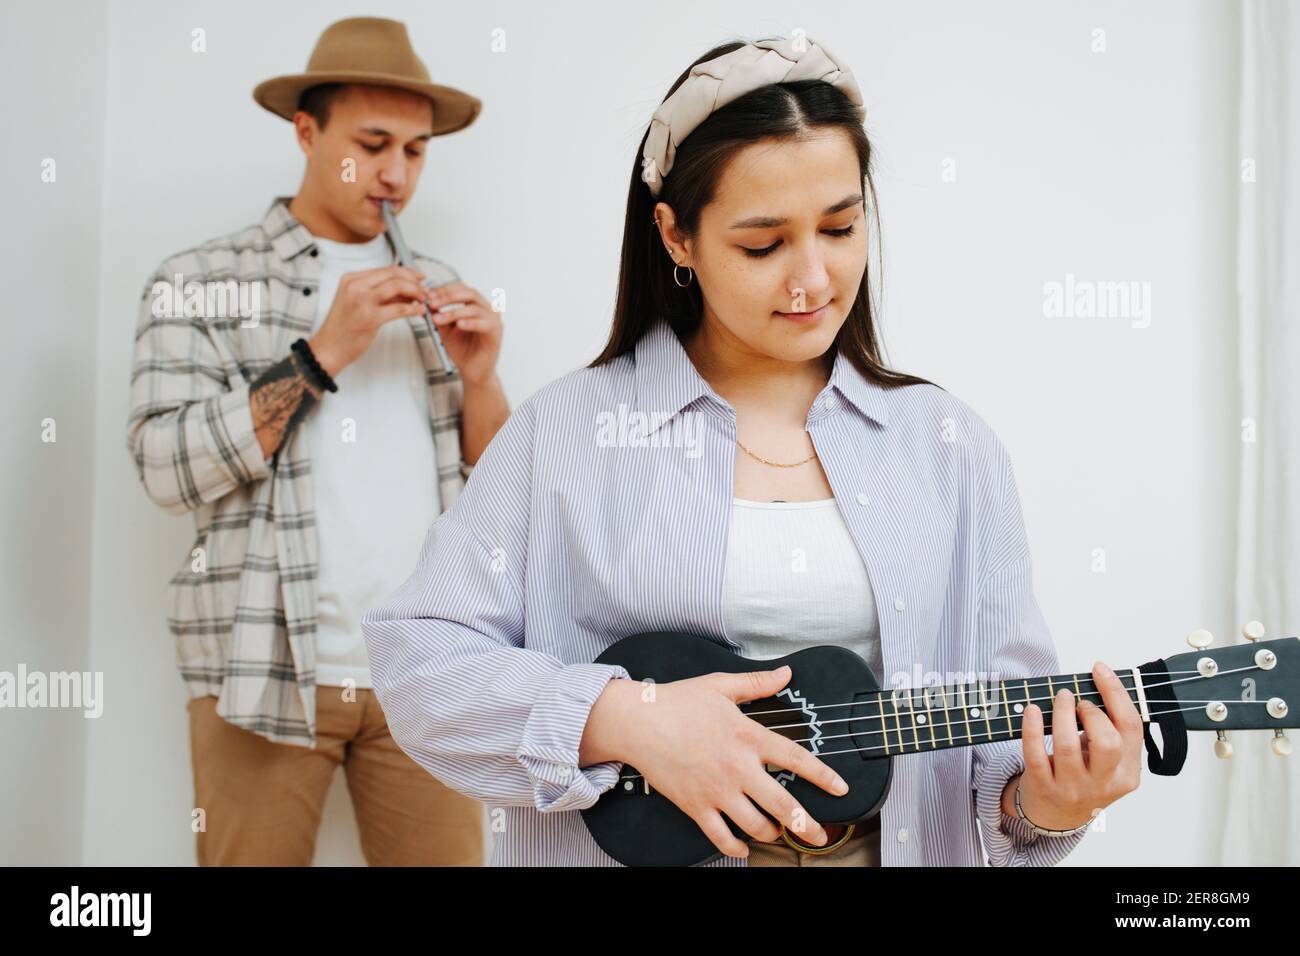 Cute girl playing ukulele in the background of a man playing the Irish flute Stock Photo